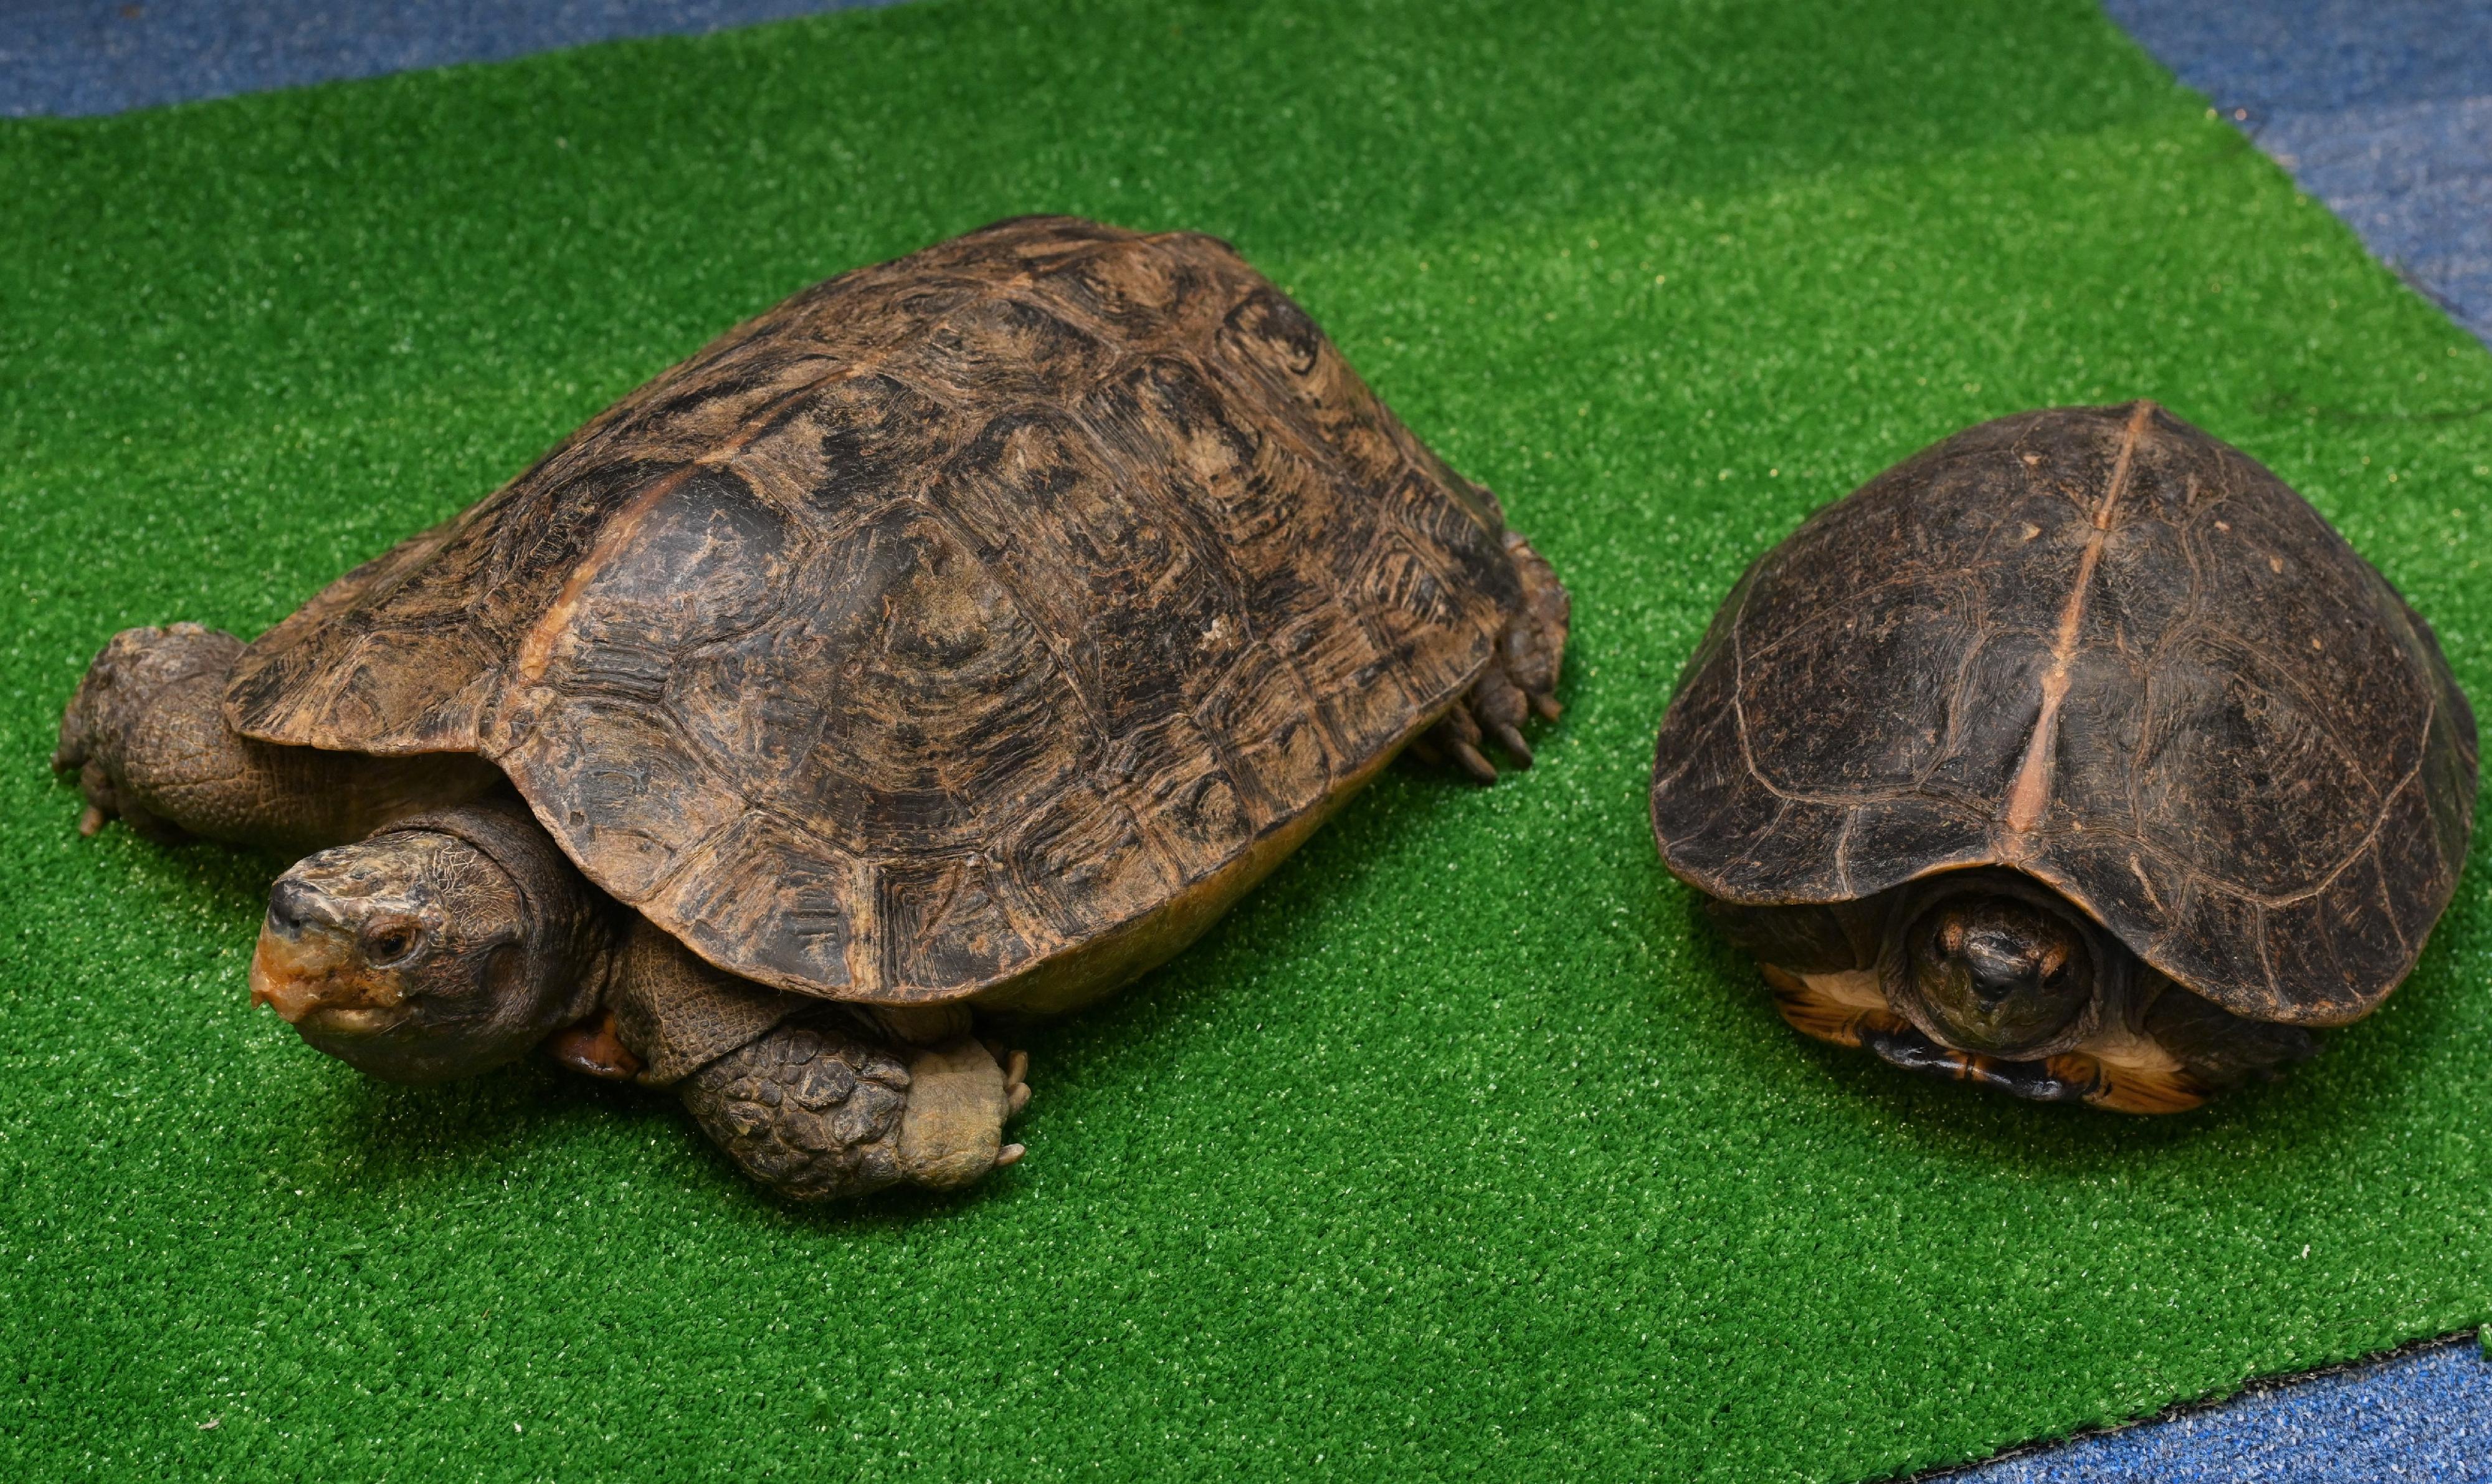 The Agriculture, Fisheries and Conservation Department conducted a joint operation with the Police on July 19. Twenty-nine specimens of endangered turtles, seven suspected turtle eggs and some tools suspected for hunting purposes were seized on some premises in Tai Po and a male suspect was arrested. Photo shows the seized Giant Asian pond turtles (Heosemys grandis).